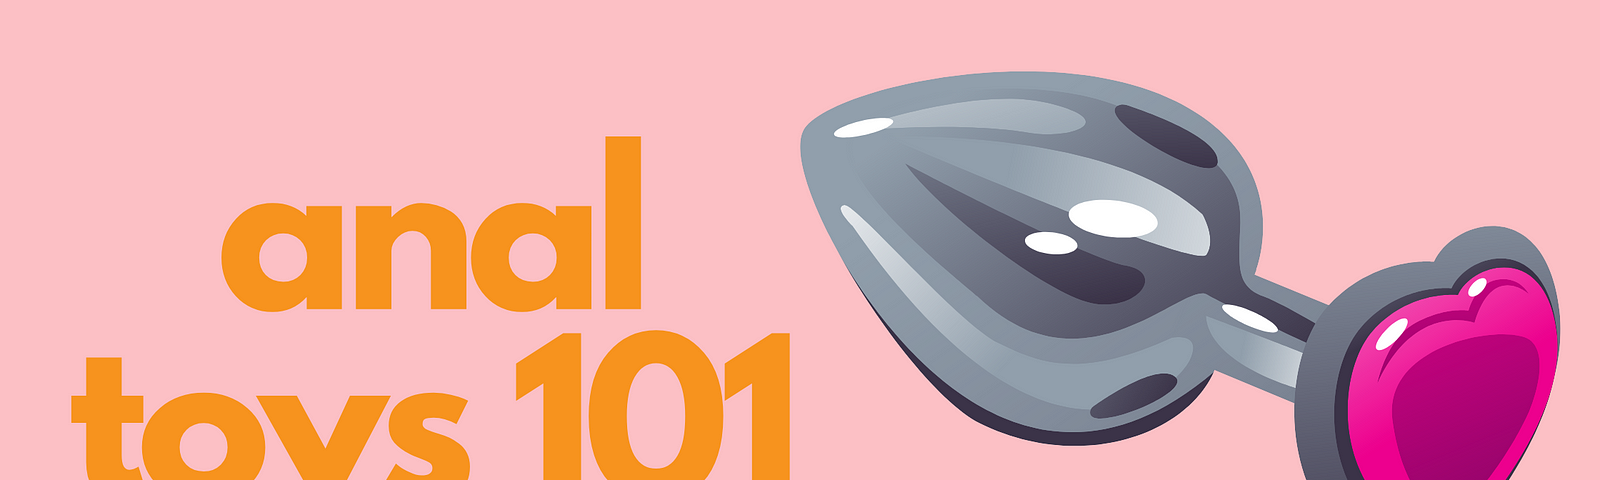 text reading “anal toys 101” next to an illustration of a butt plug with a heart gem at the base.